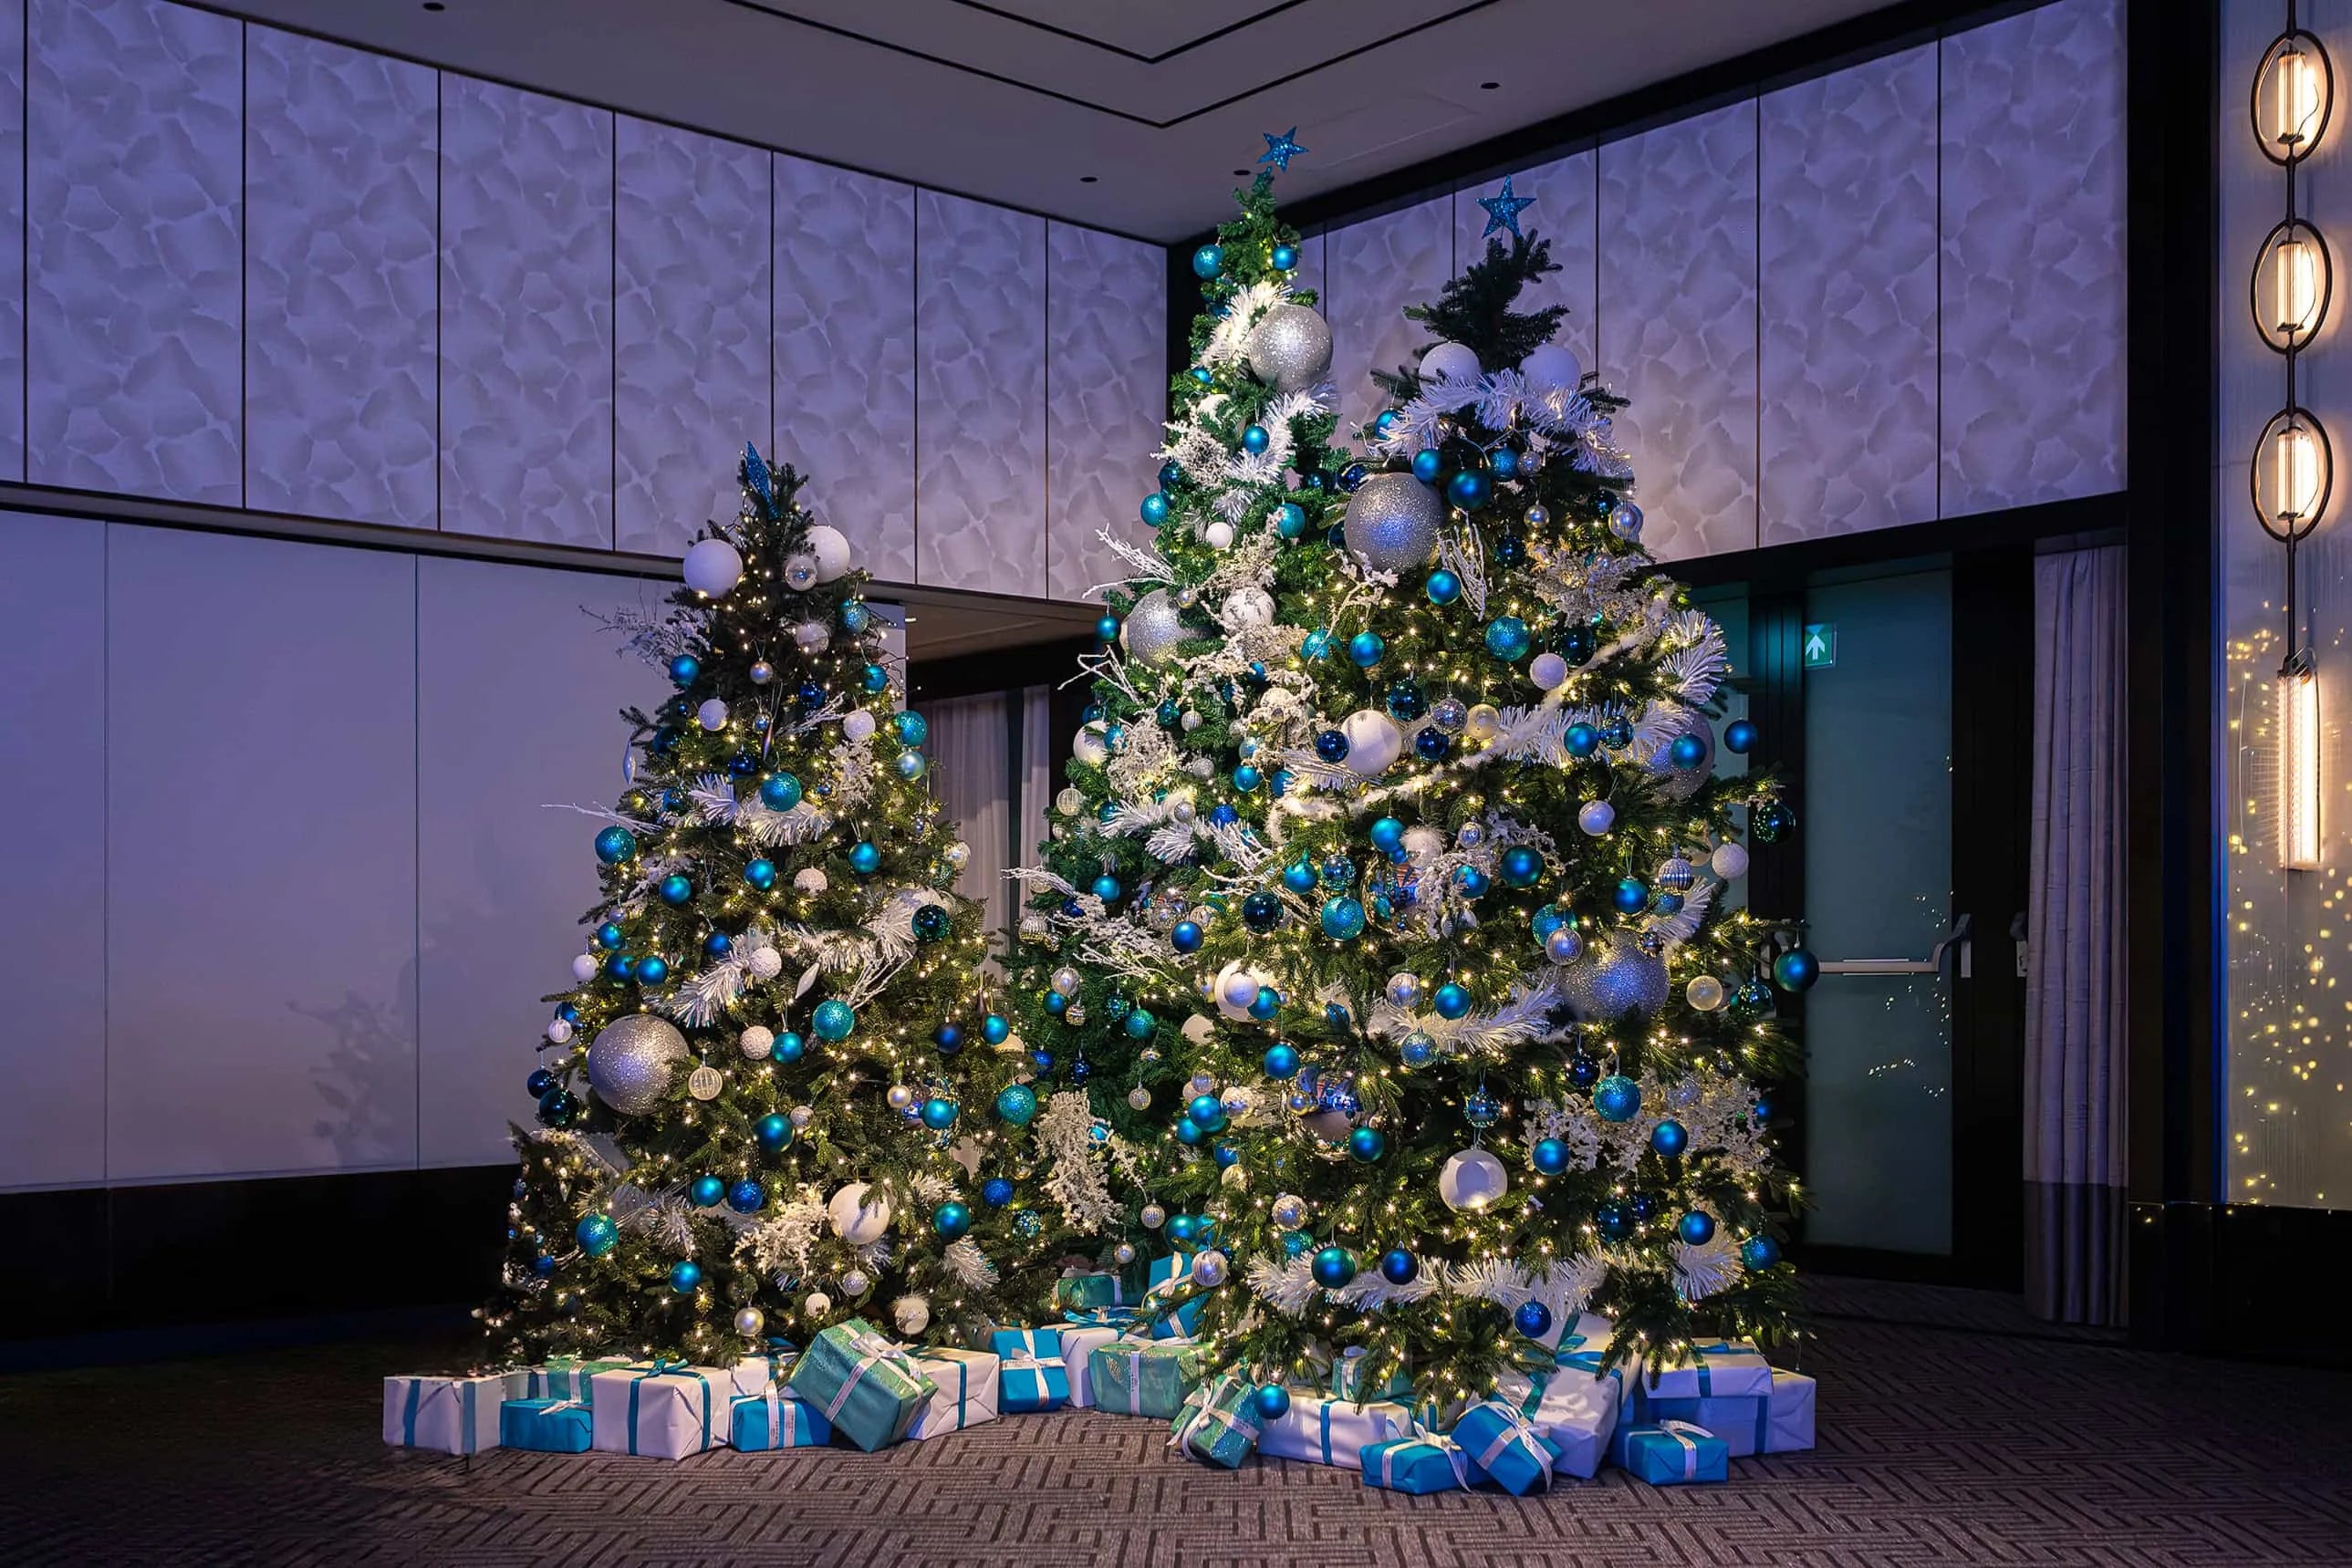 Two large Christmas trees decorated with white and blue ornaments, white lights, and topped with silver stars, surrounded by wrapped gifts in blue and silver paper, in a modern room with textured white walls and vertical light fixtures.